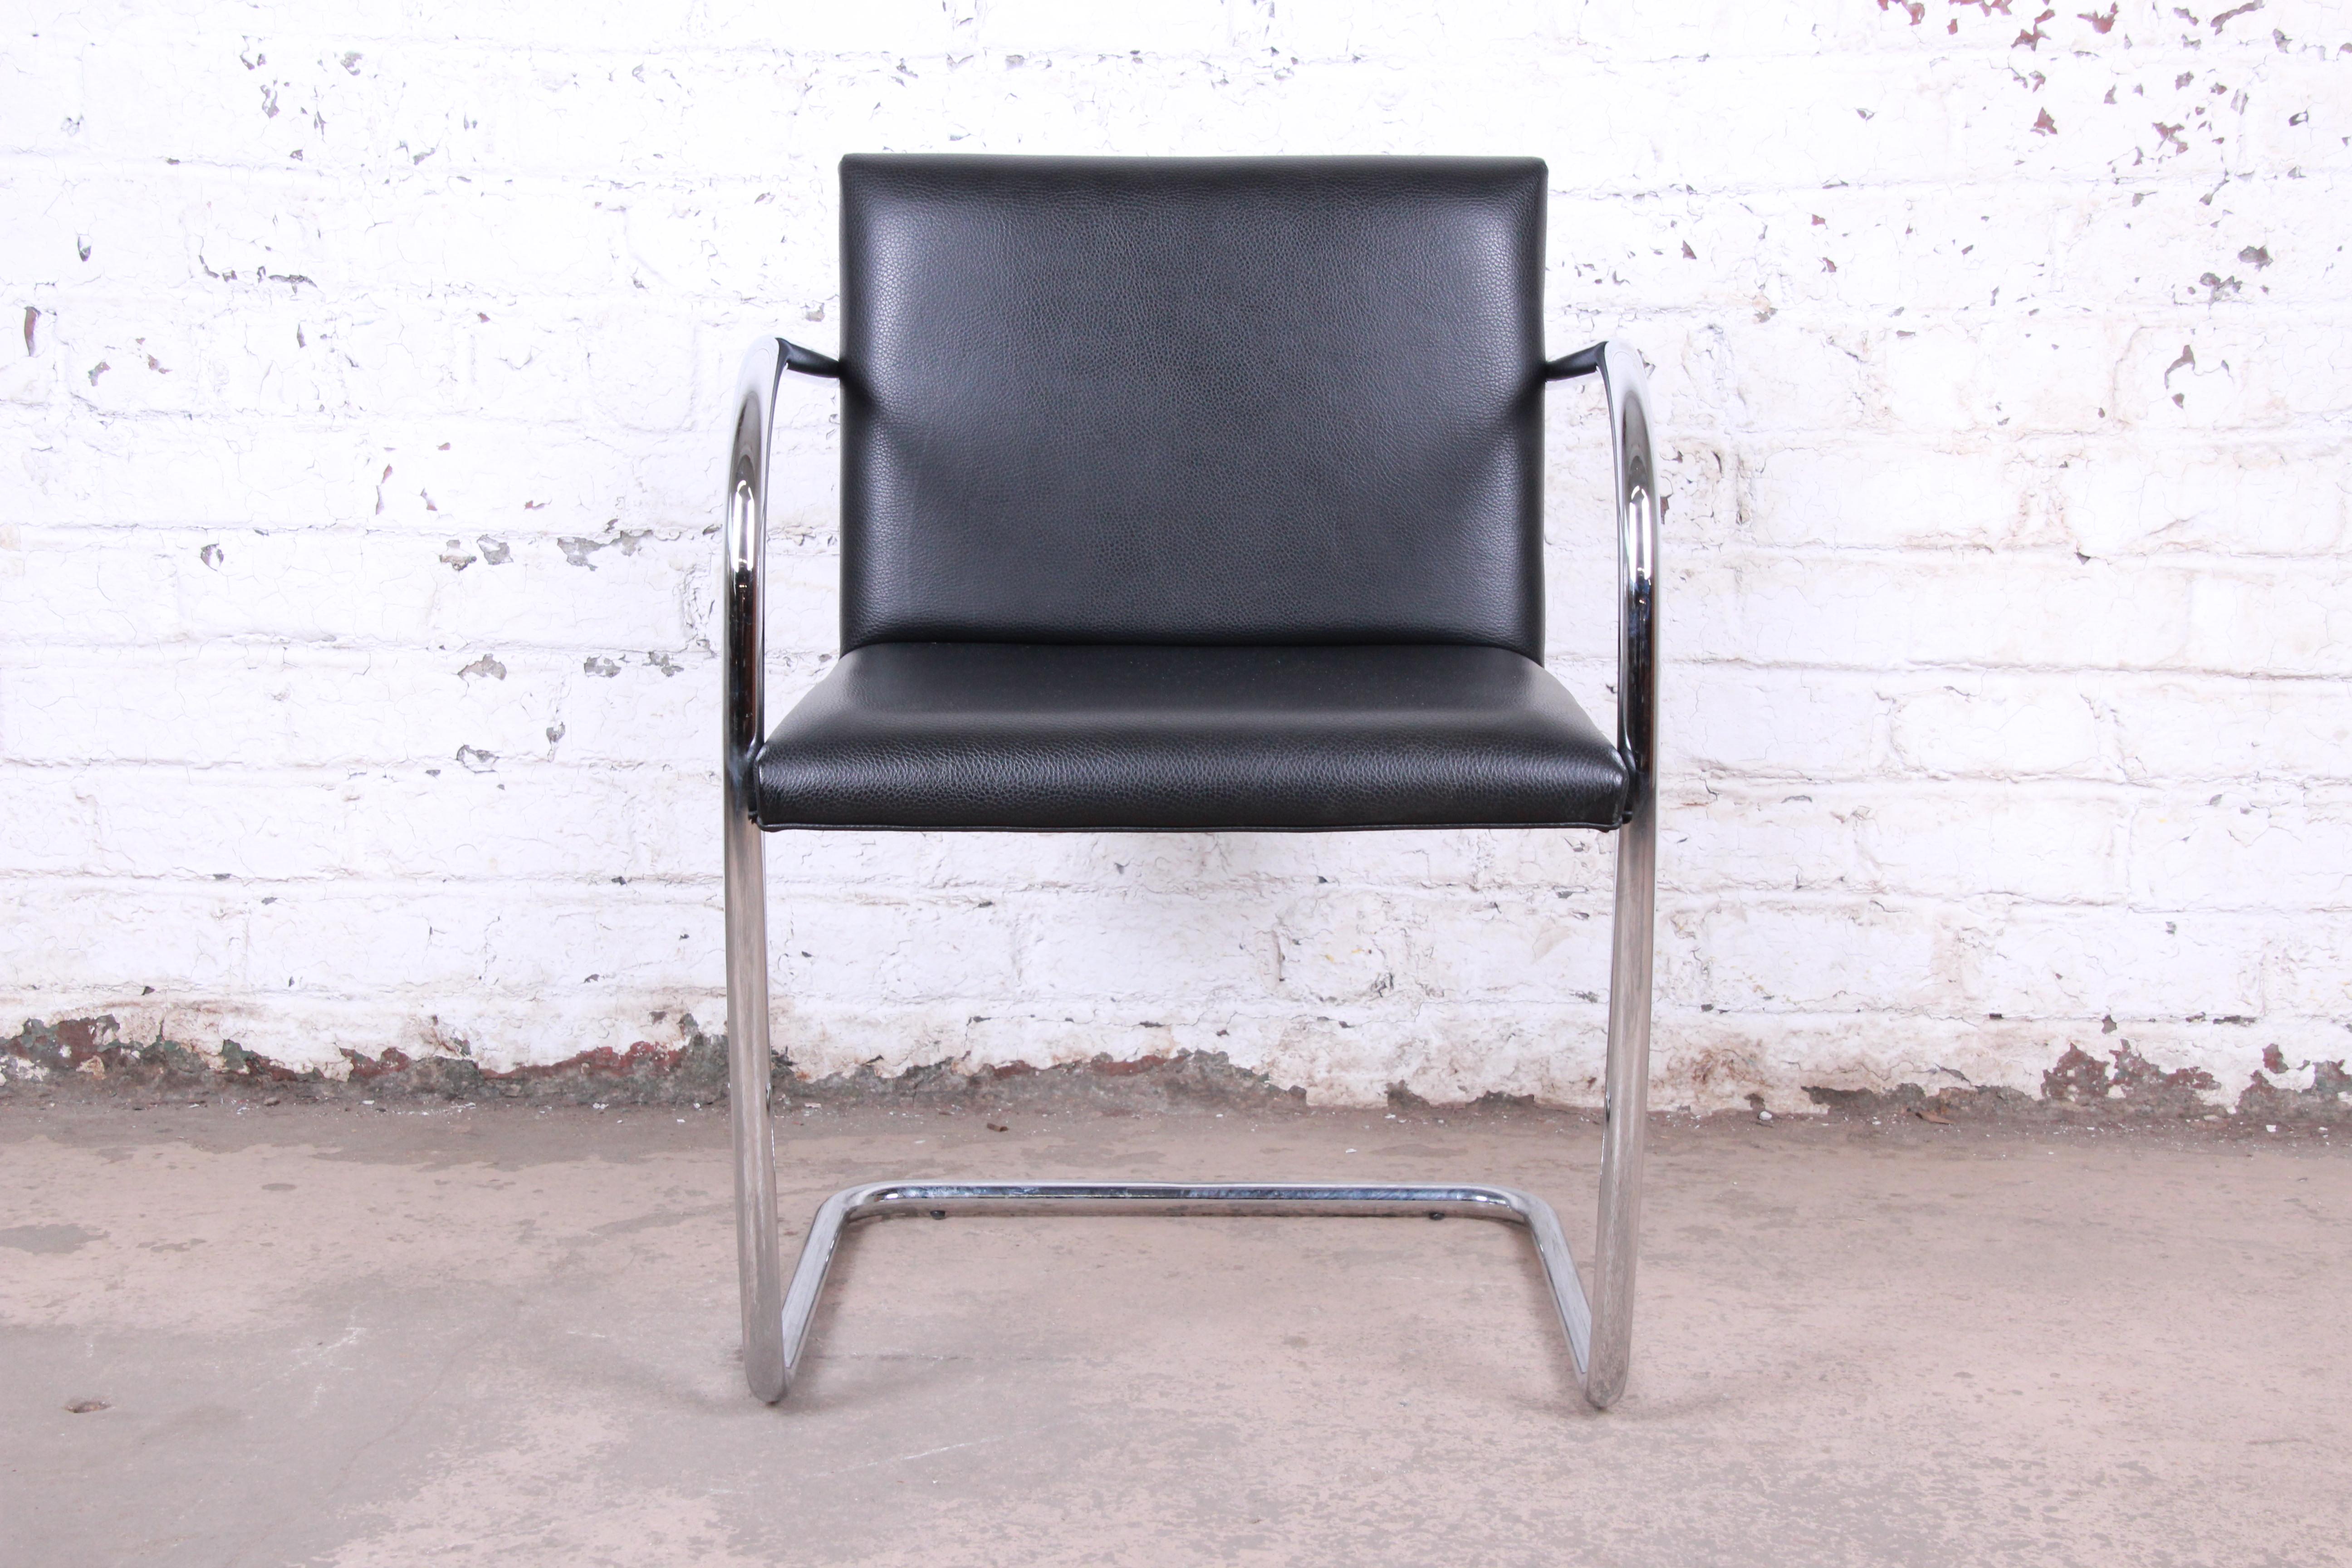 An exceptional Mid-Century Modern Brno tubular club or lounge chair

Designed by Ludwig Mies van der Rohe in 1930 for the Tugendhat House.

Italy, circa 1980s

Chrome-plated steel frame with leather upholstery.

Measures: 21.5